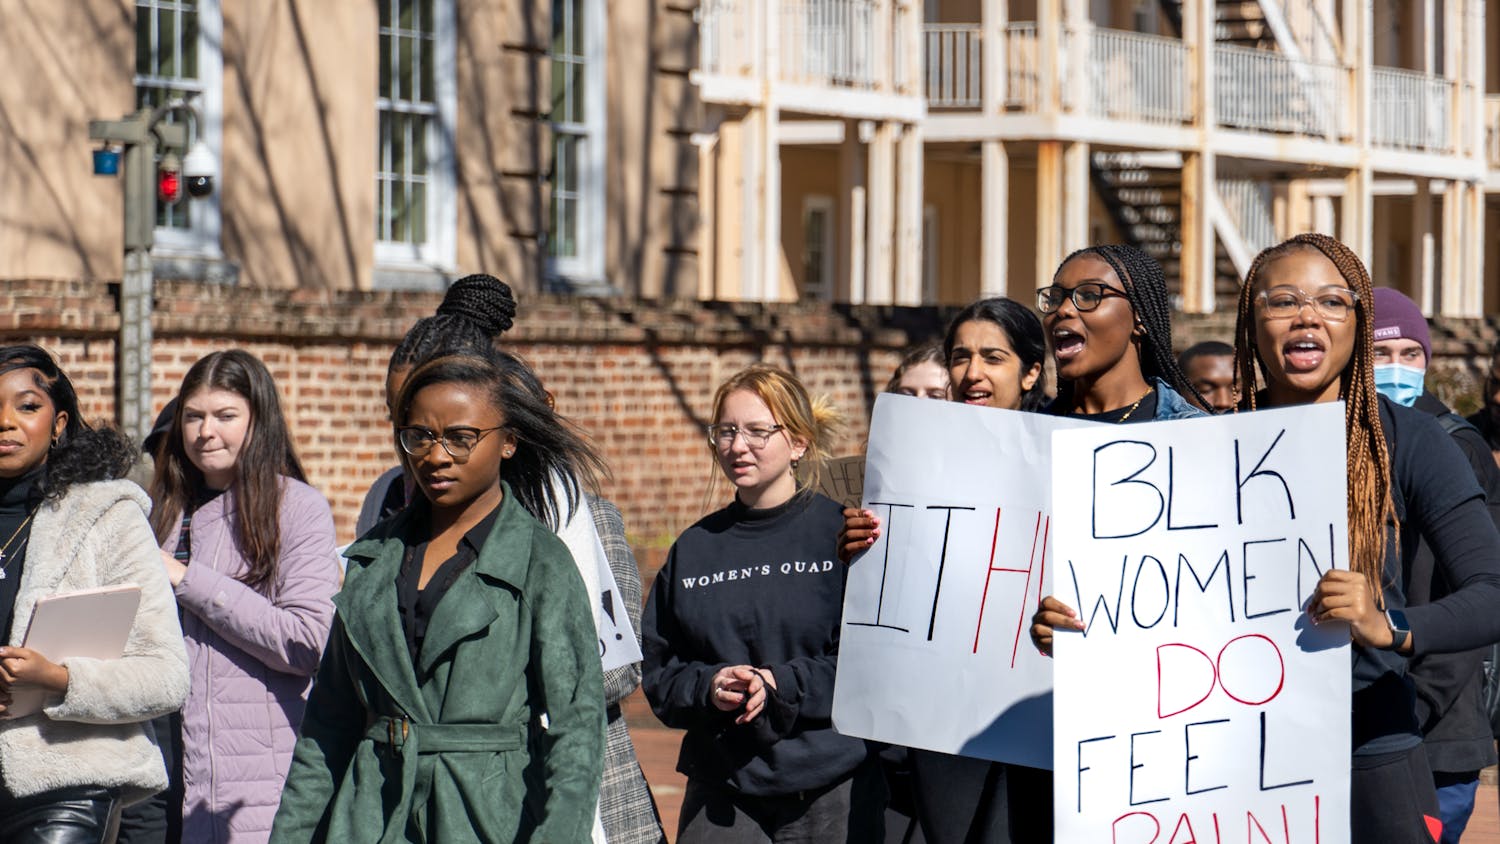 Protesters walk from Greene St. to the Statehouse on Feb. 5, 2022. Members of the NAACP, USC students, and community members joined in the statehouse walk to protest the university's upkeep of the Heritage Act.